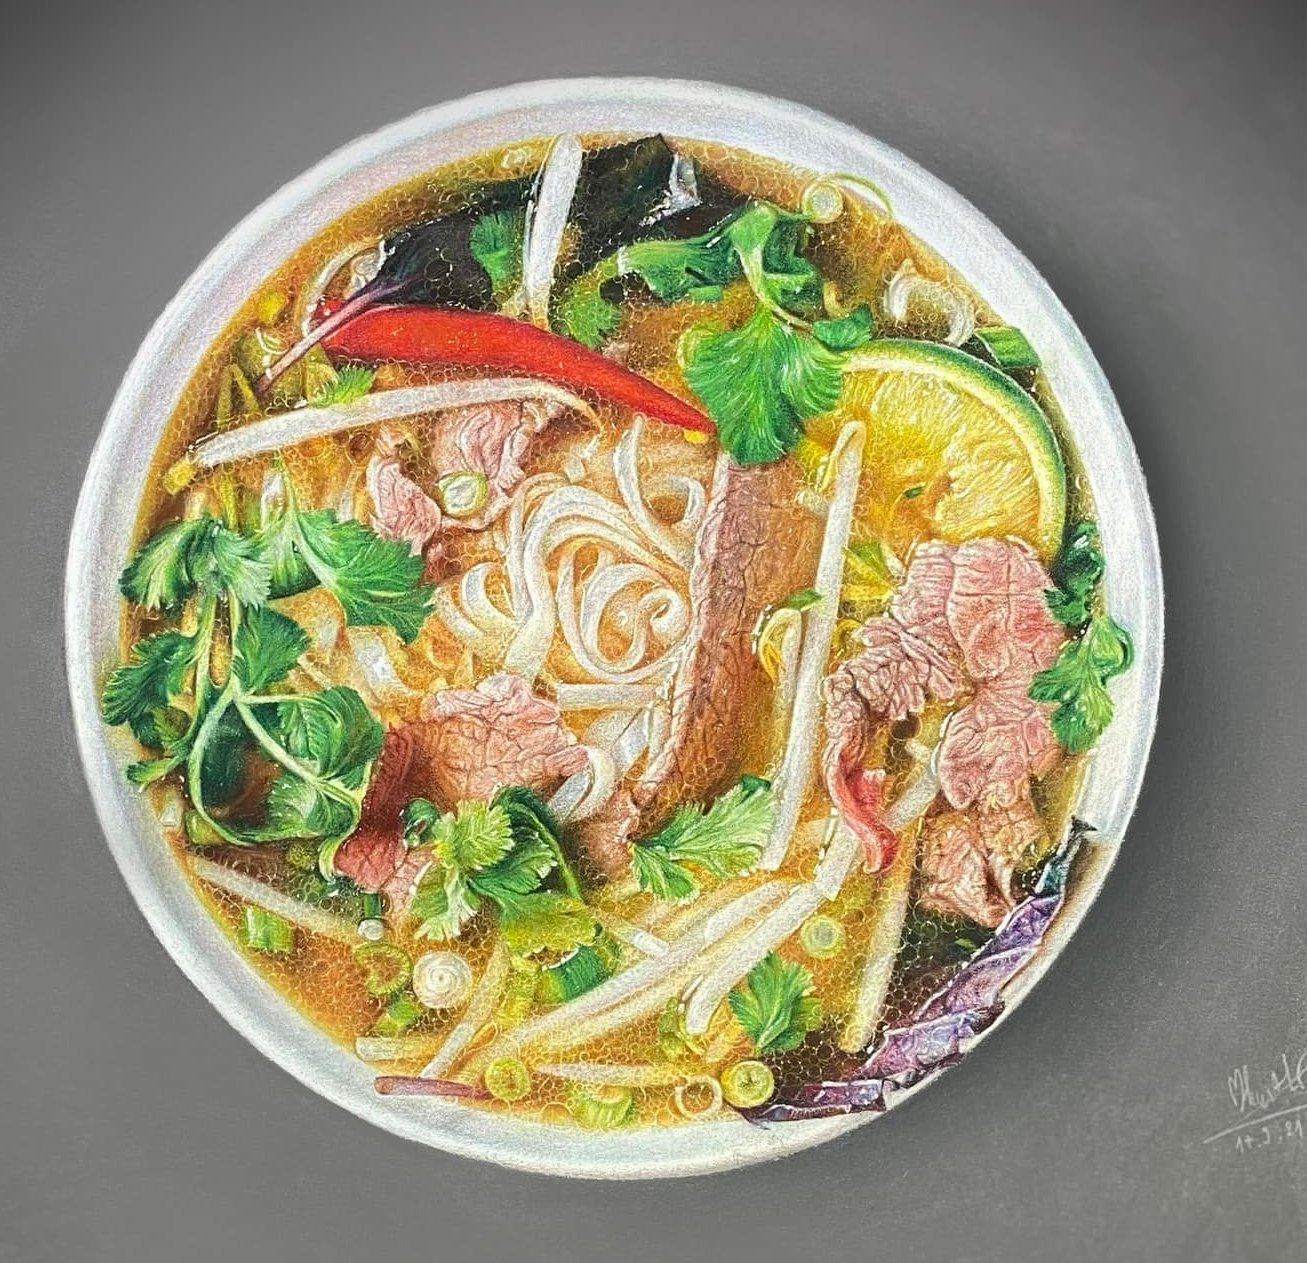 Ho Chi Minh City man stuns viewers with ‘pho’ painting that cannot be more real